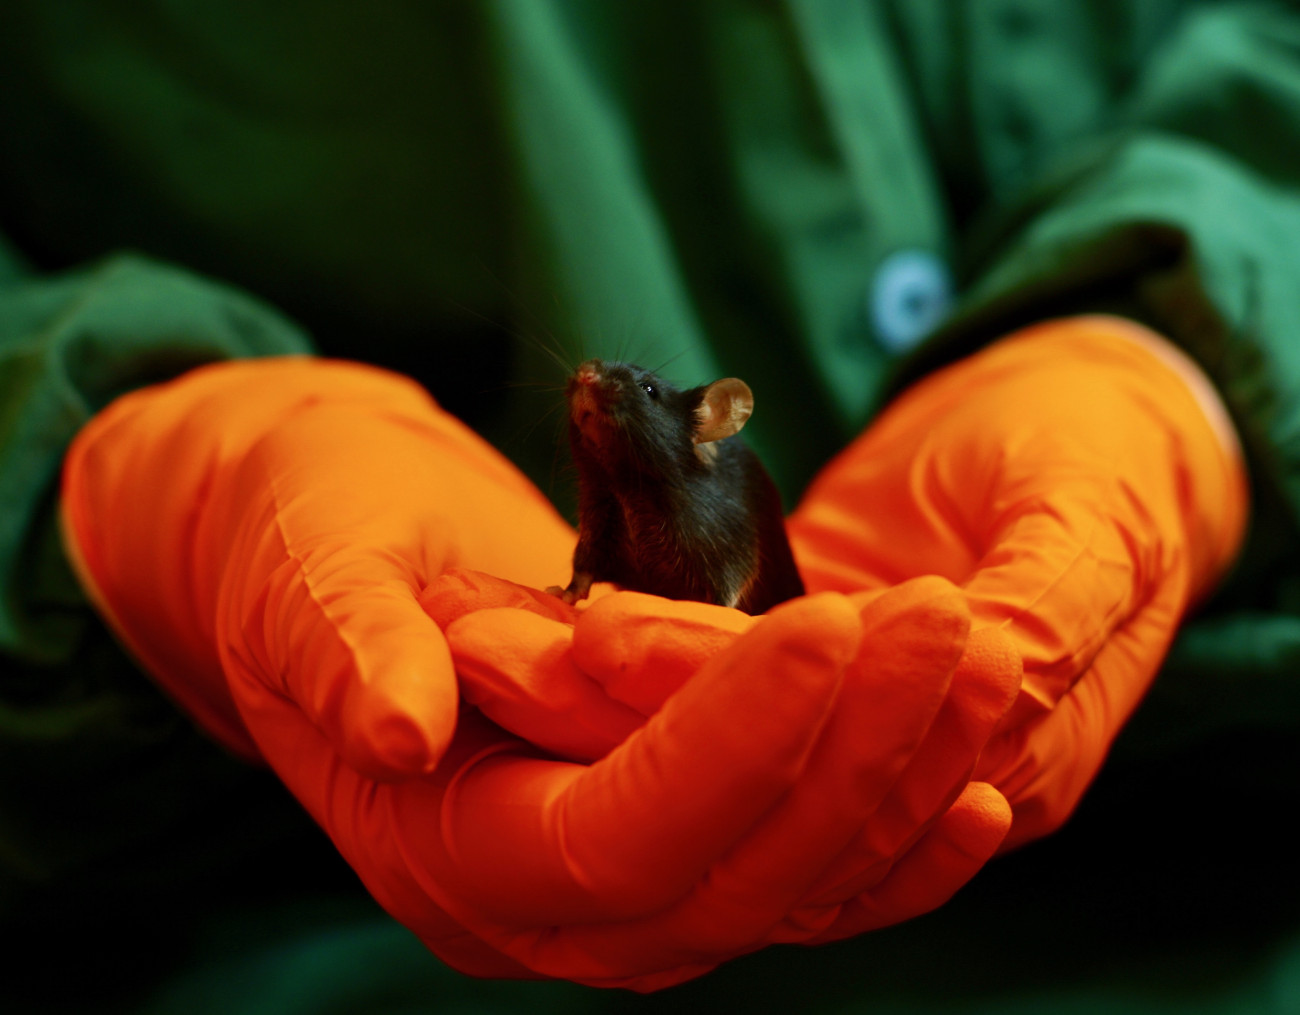 Black mouse held in cupped hands wearing orange gloves.